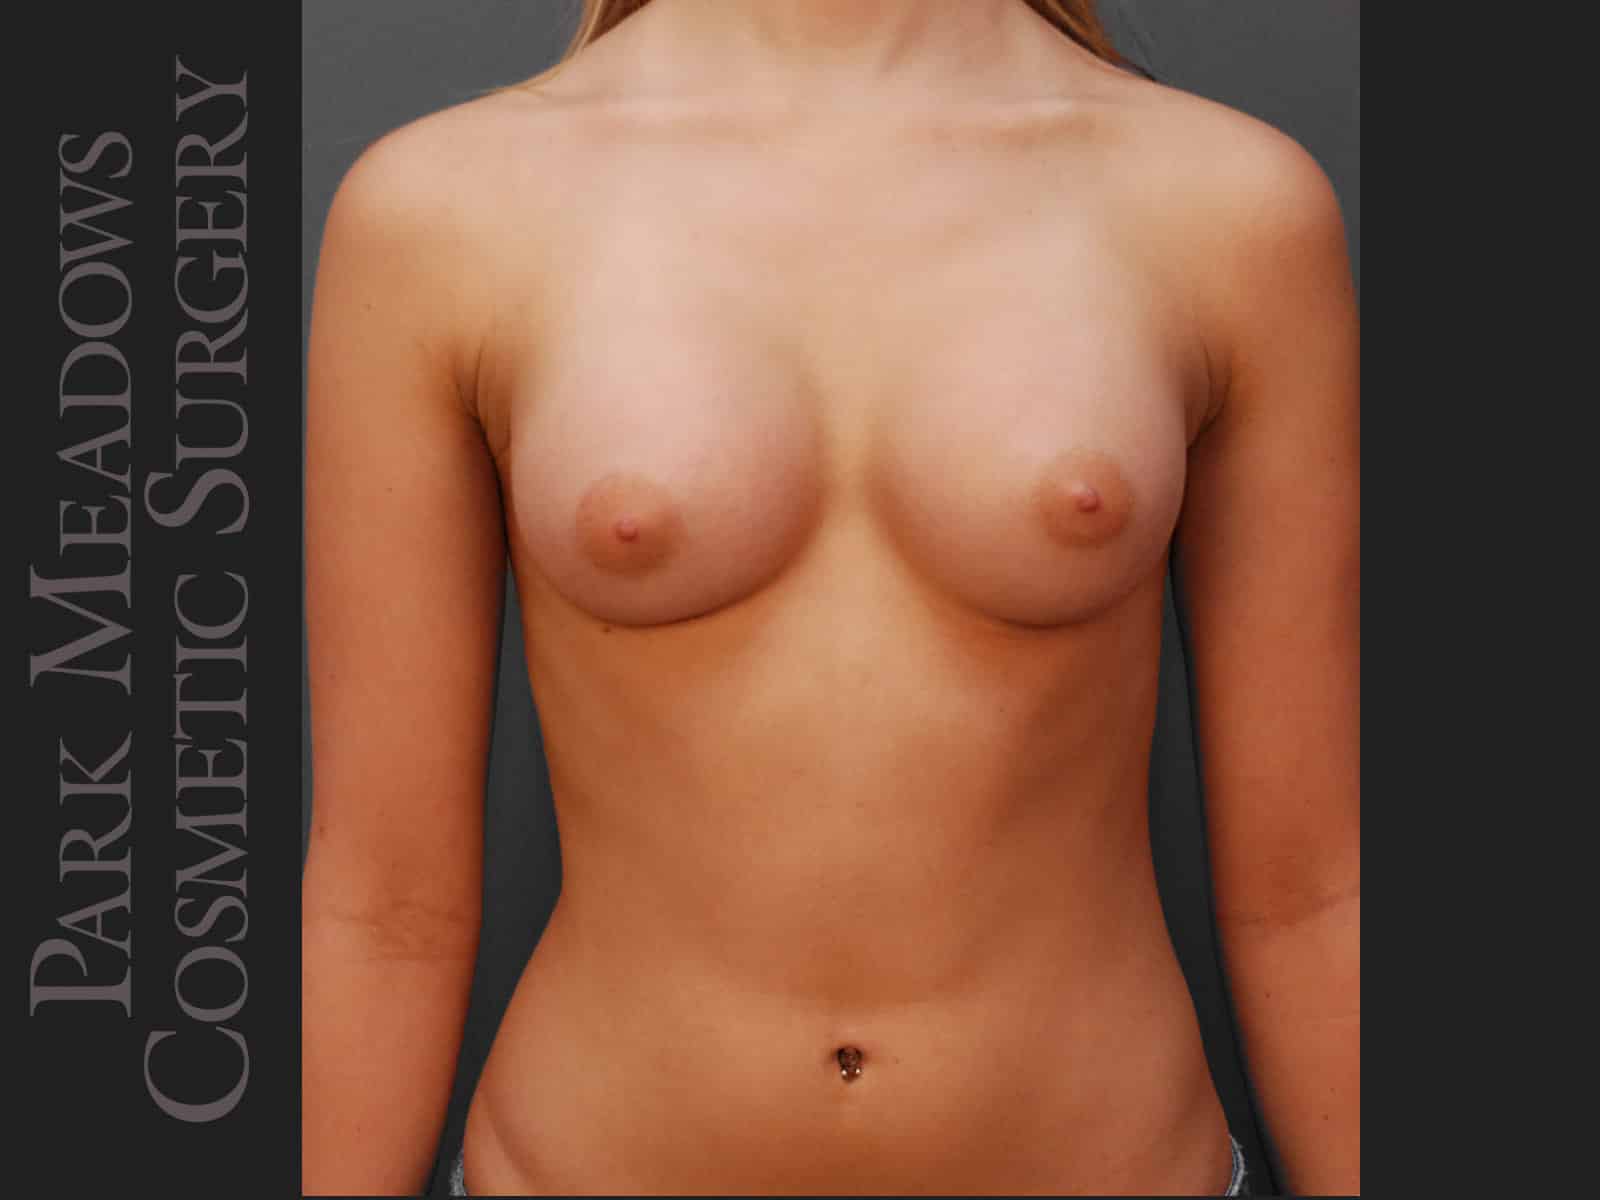 Saline Breast Augmention; 250cc implants filled to 275cc